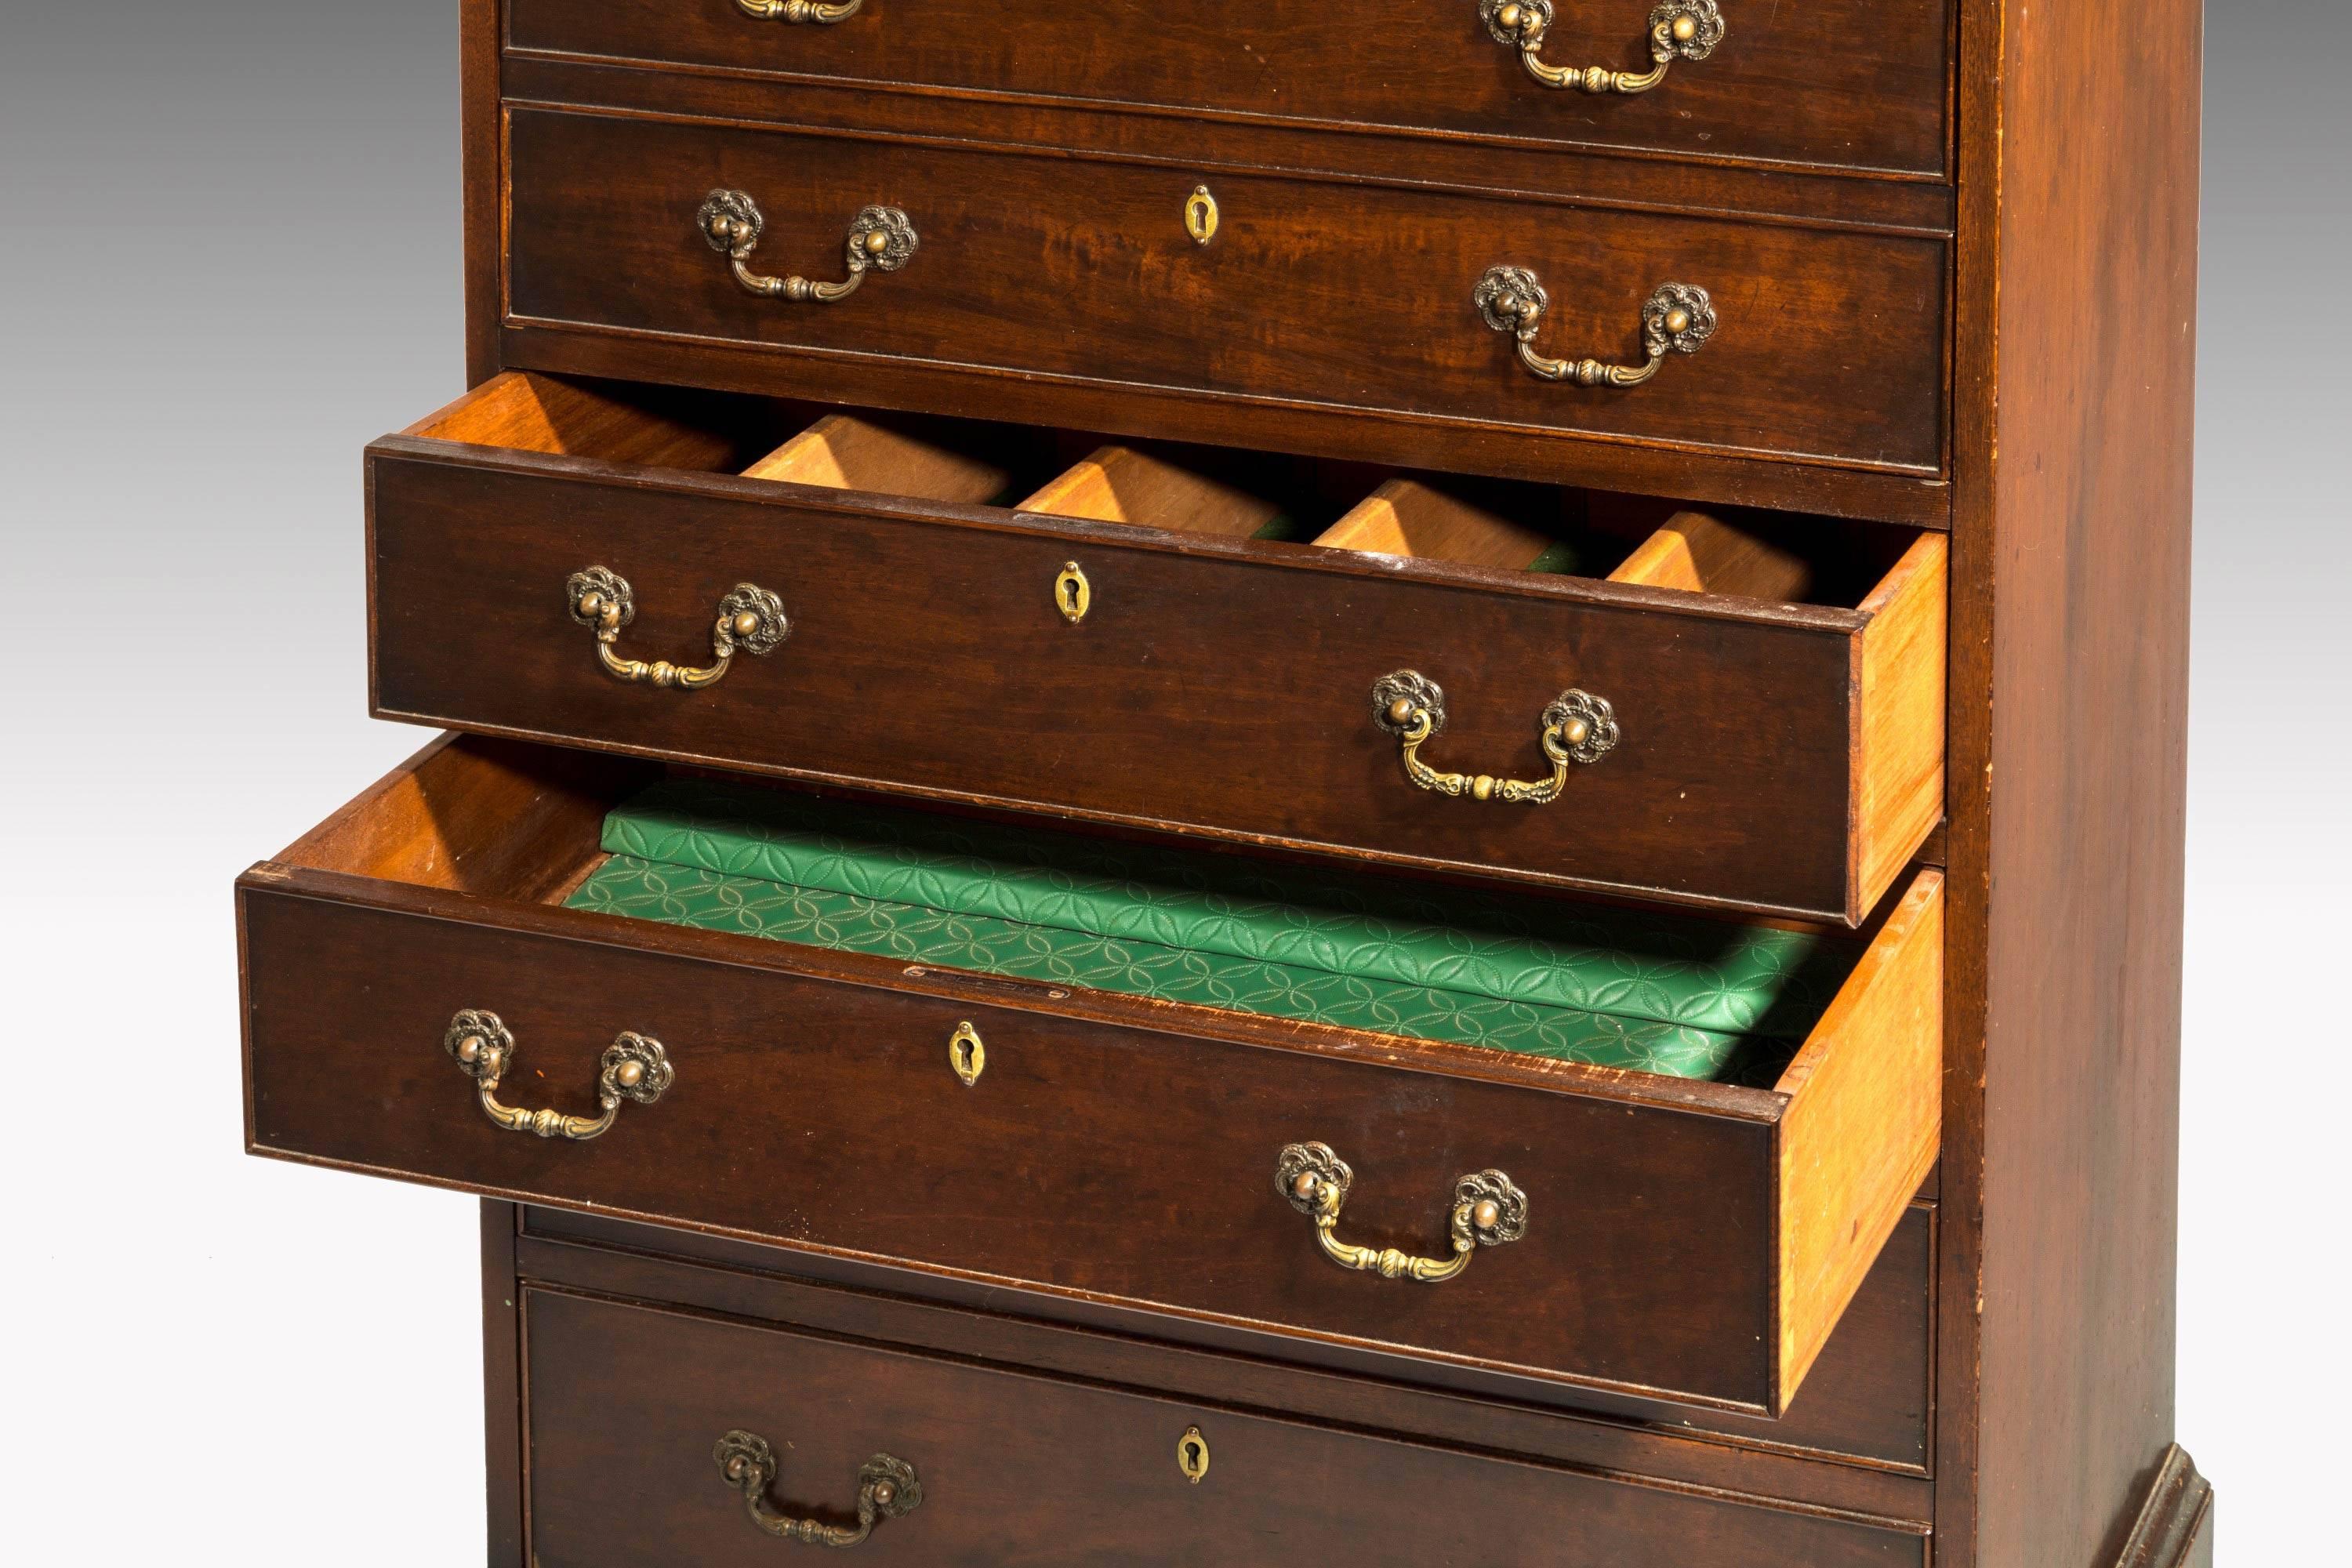 20th Century Chippendale Design Mahogany Chest of Drawers with the Original Upper Fretwork